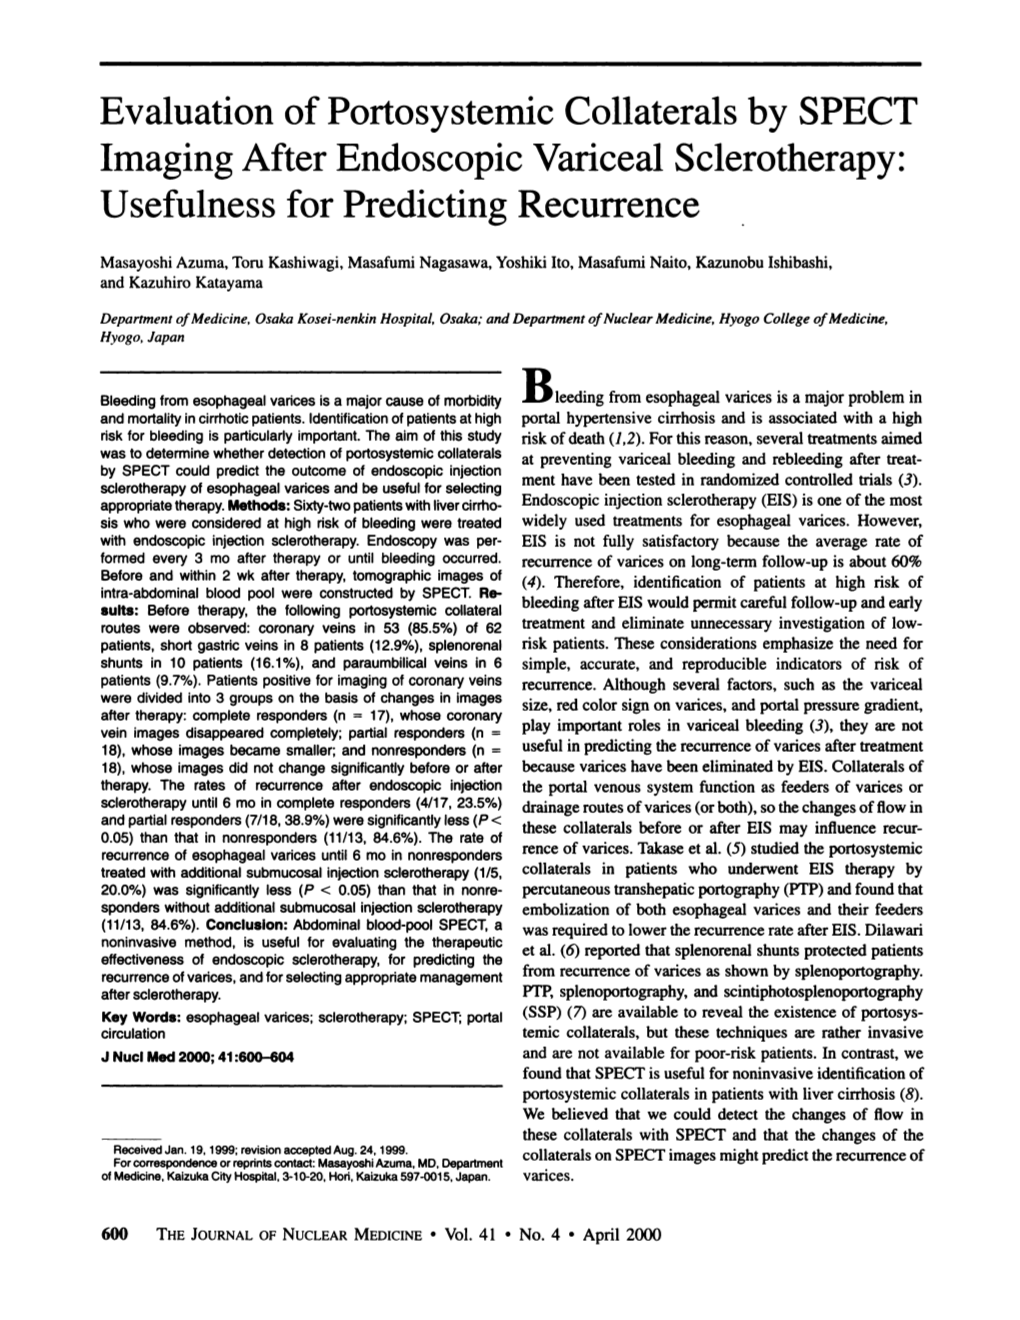 Evaluation of Portosystemic Collaterals by SPECT Imaging After Endoscopic Variceal Sclerotherapy: Usefulness for Predicting Recurrence